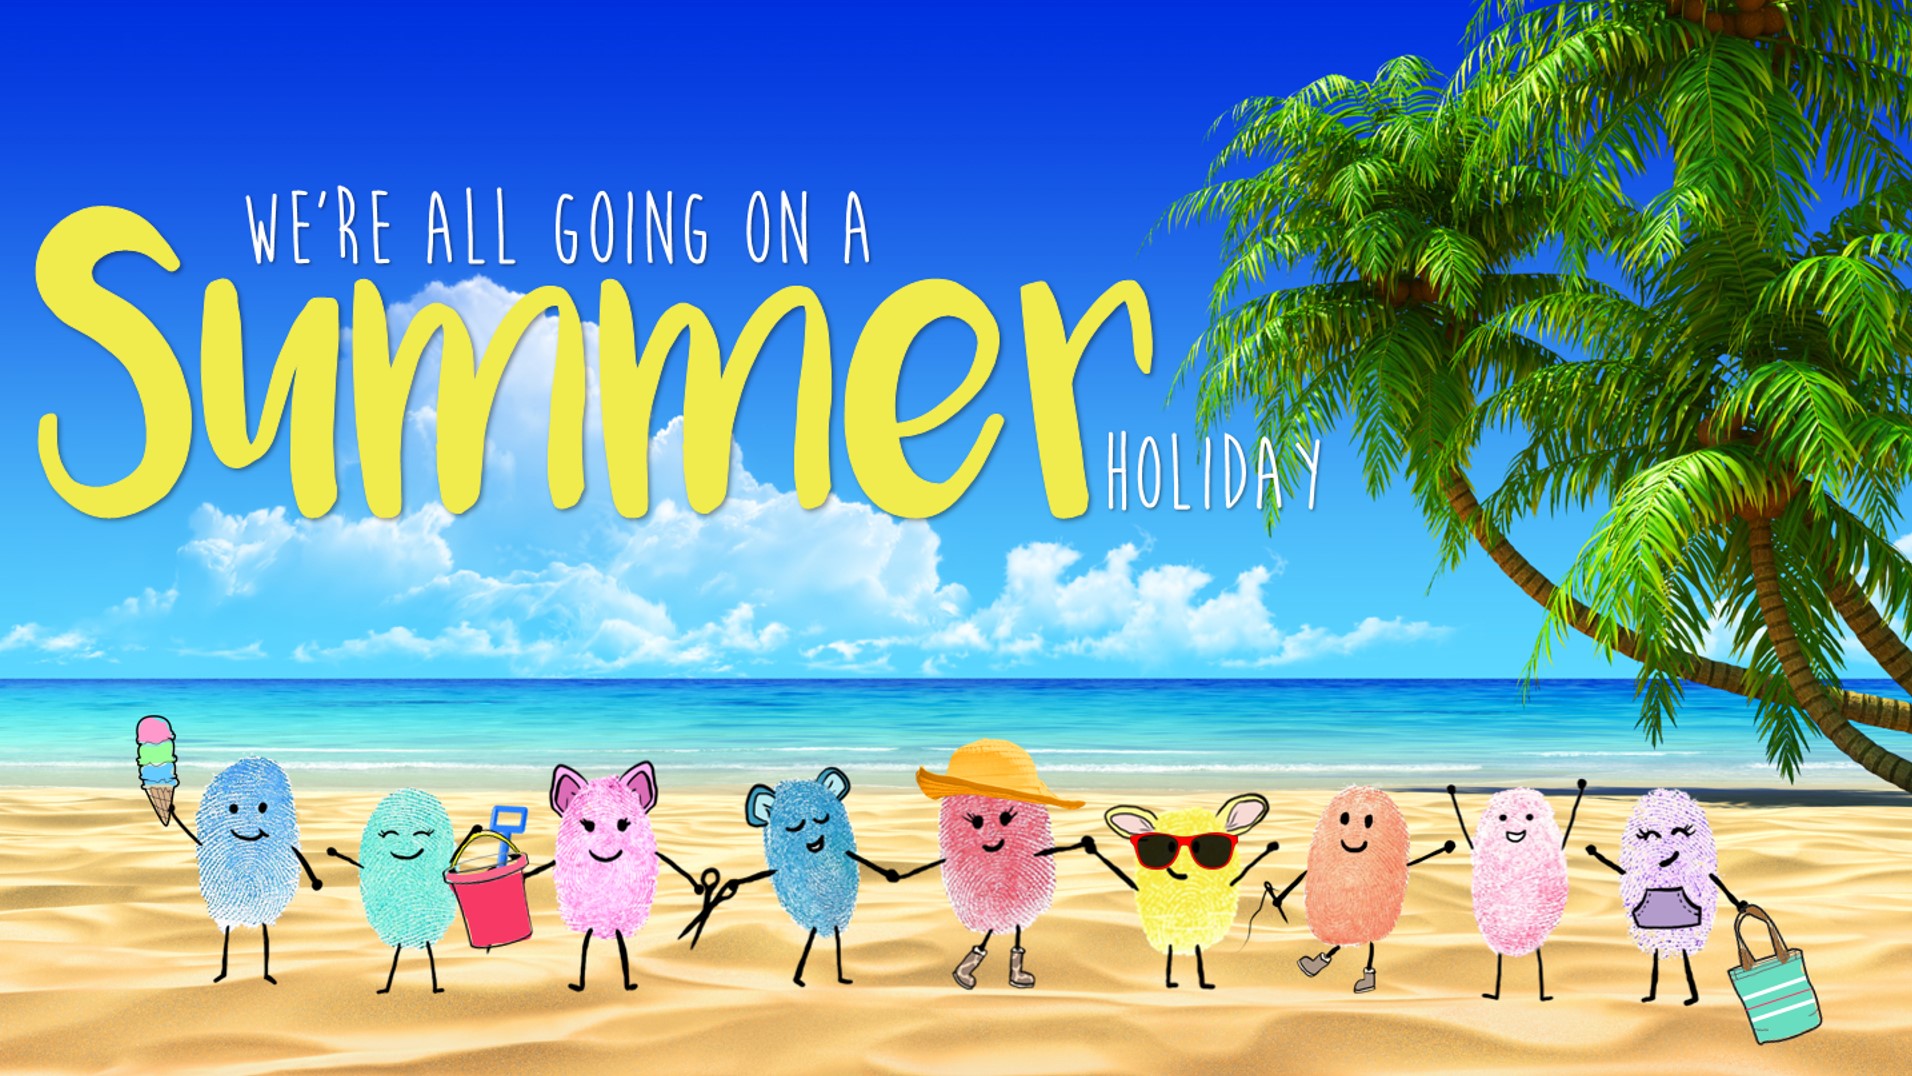 We're all going on our Summer Holidays! - The All in One Company